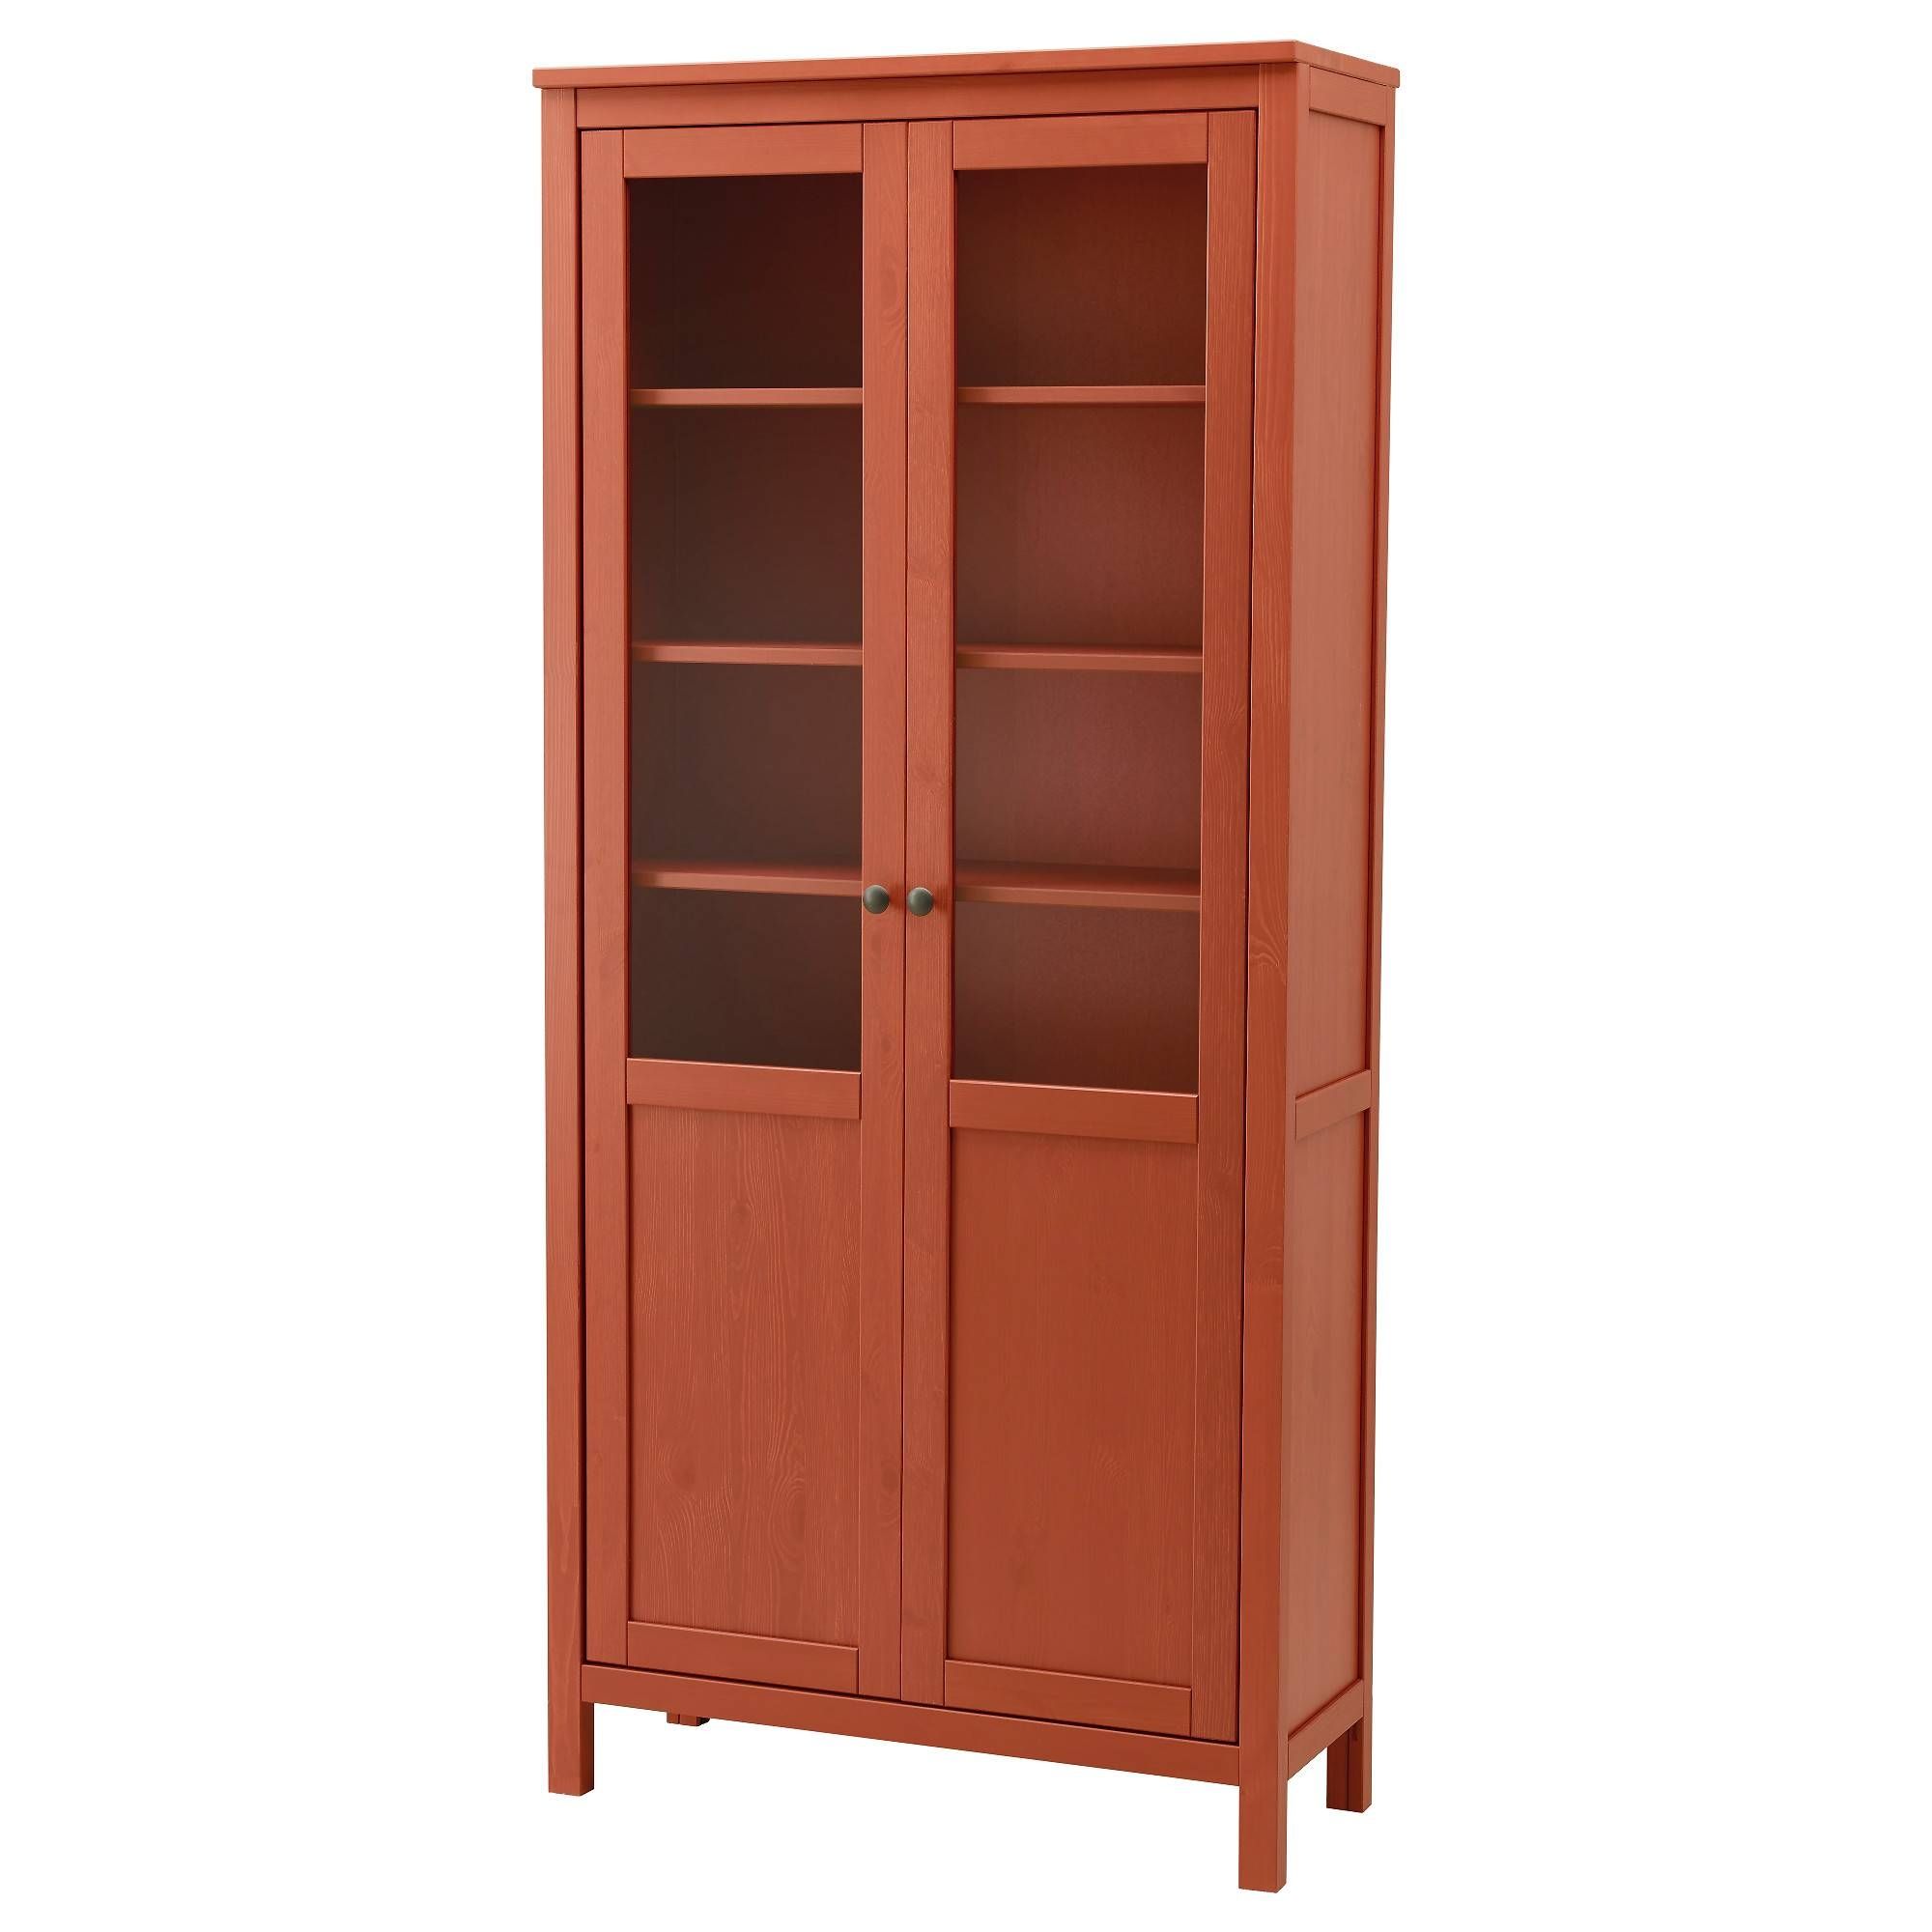 Hemnes Cabinet With Panel/glass Door – Red Brown – Ikea Intended For Tv Cabinets With Glass Doors (View 6 of 15)